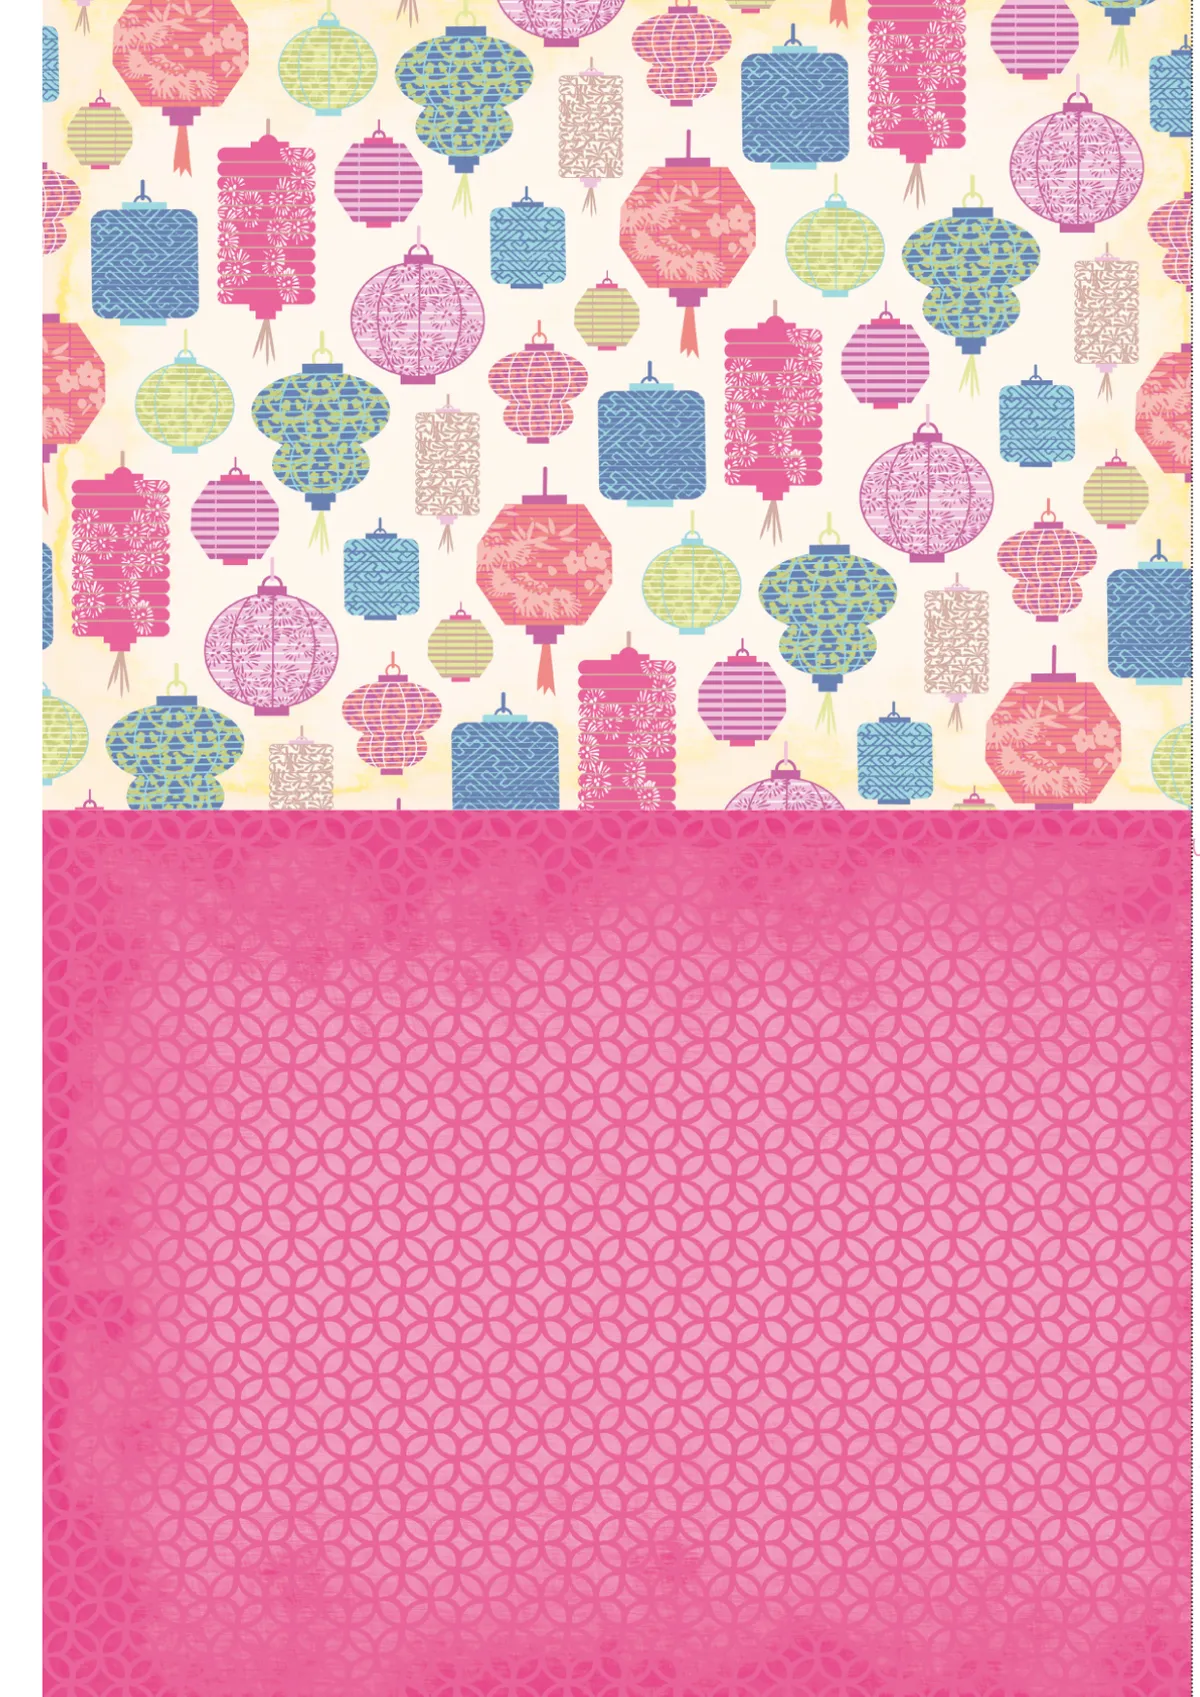 Japanese Dreams patterned papers 01